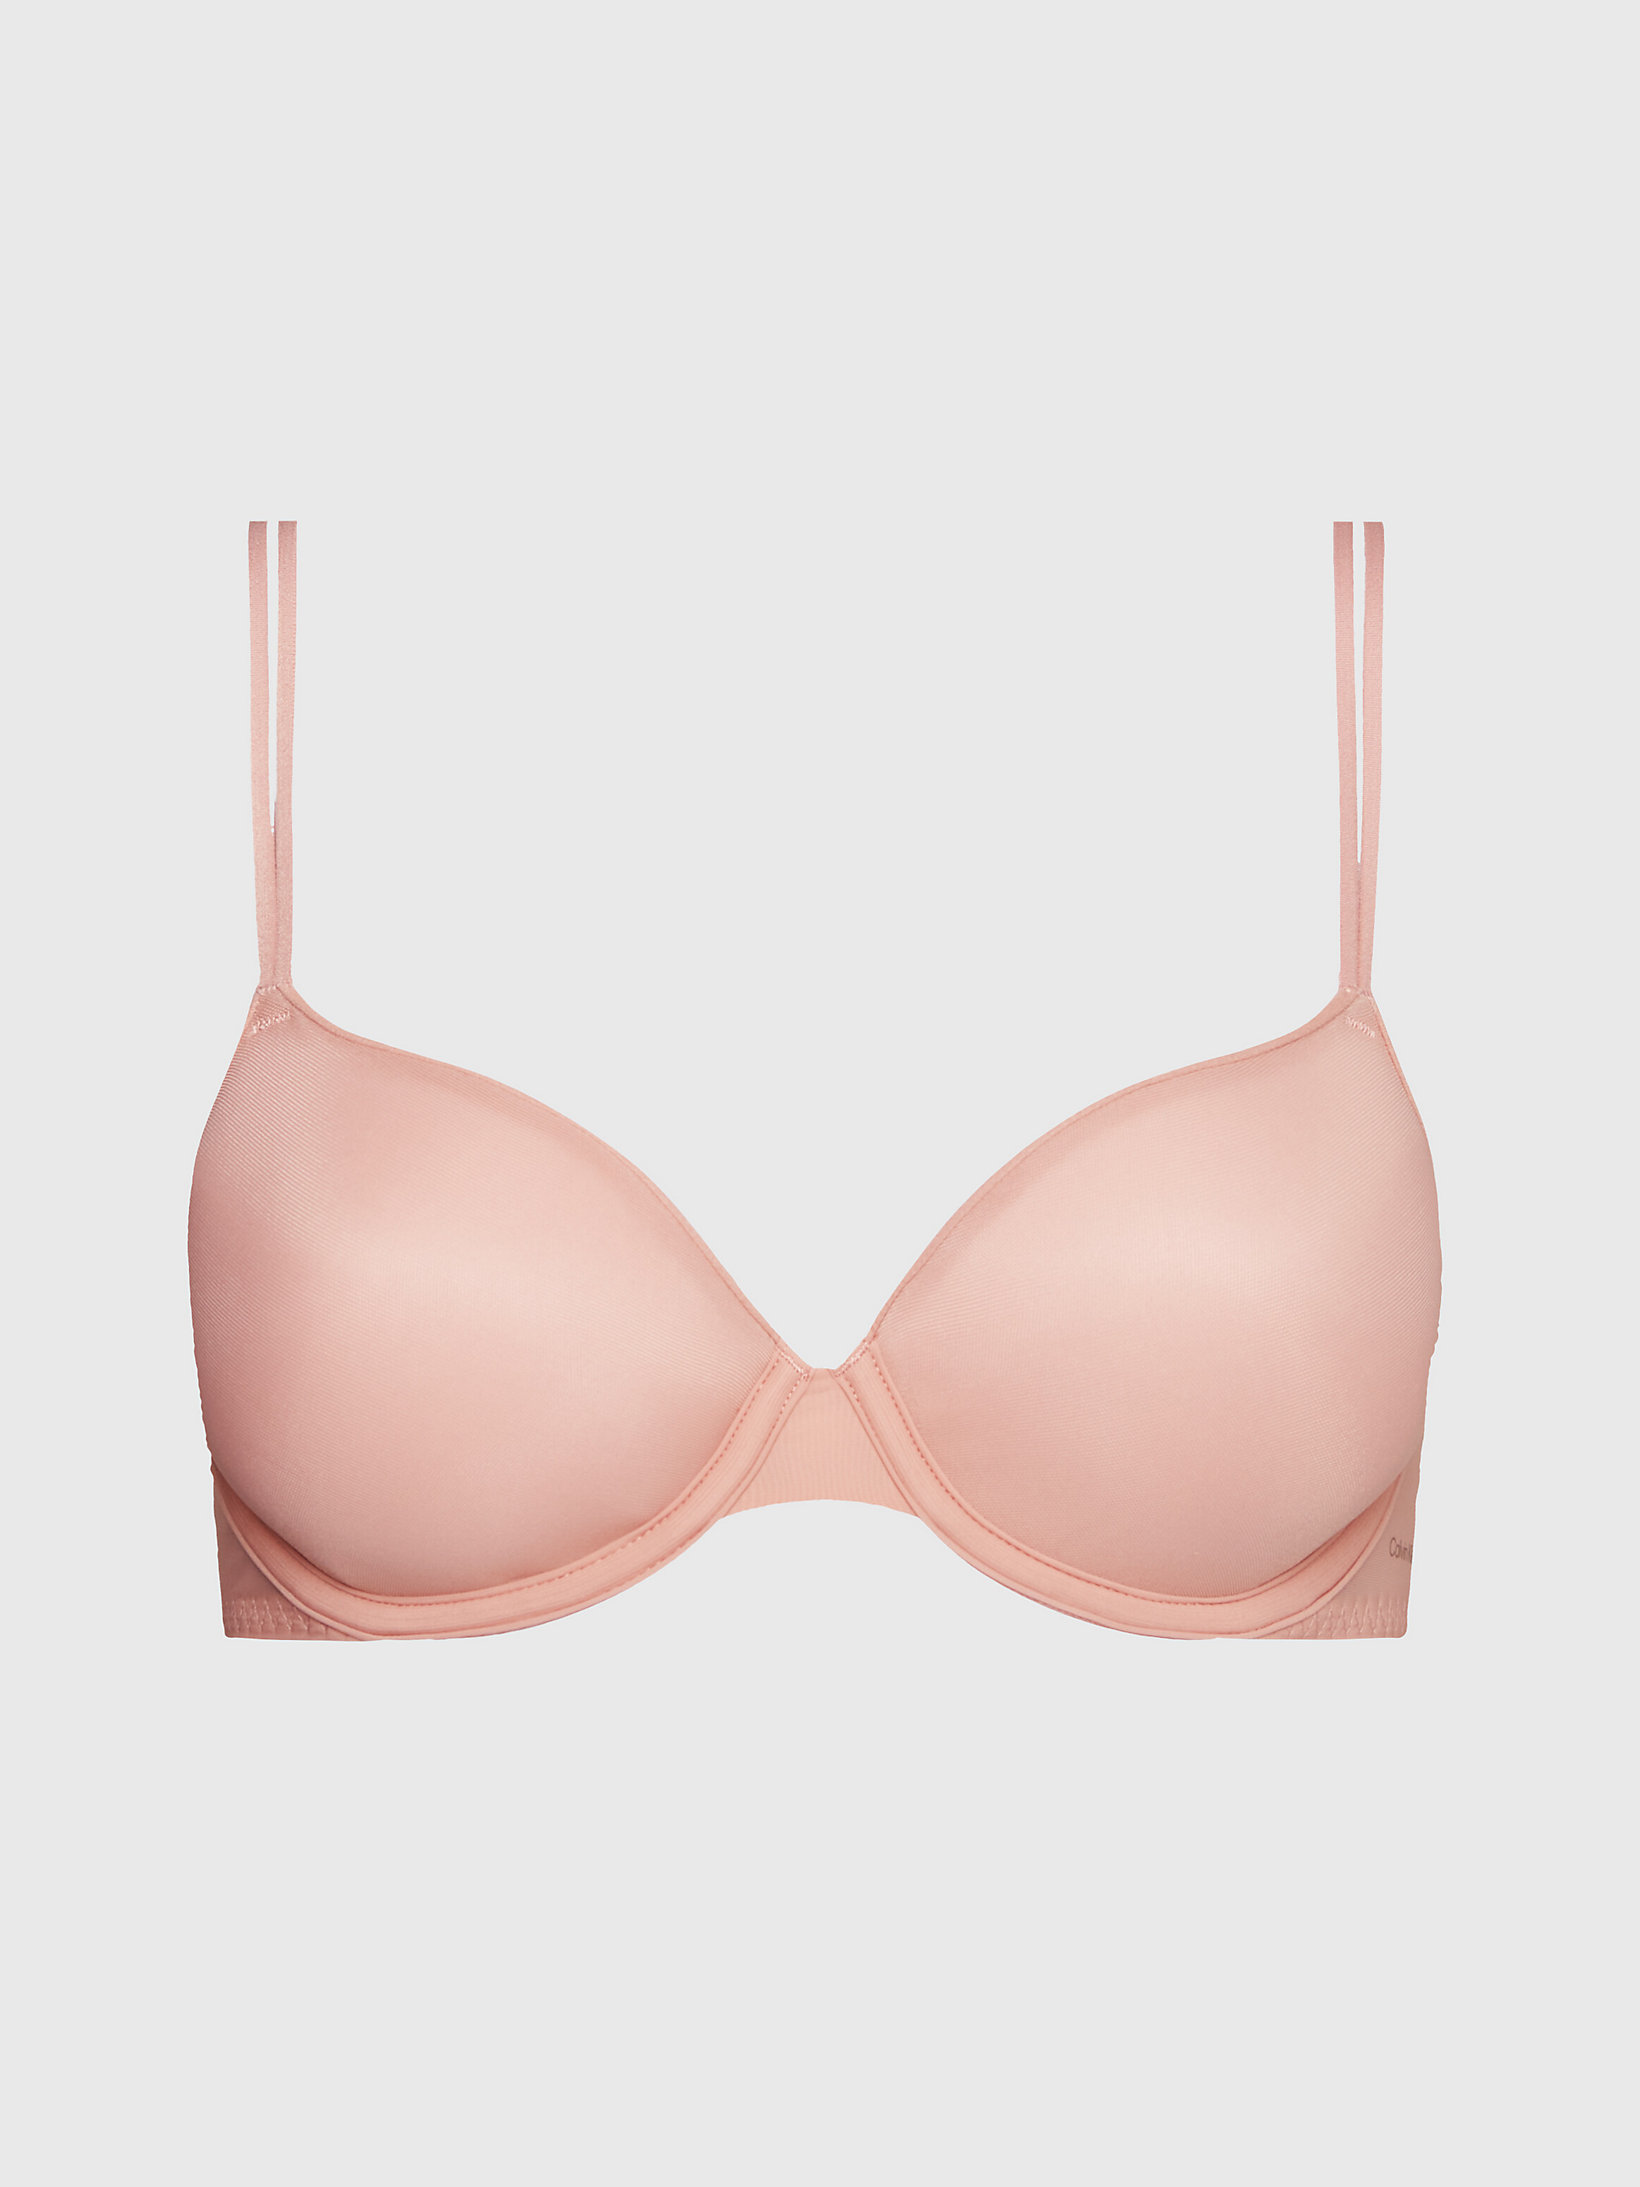 Soutien-Gorge Invisible - Sheer Marquisette > Subdued > undefined femmes > Calvin Klein